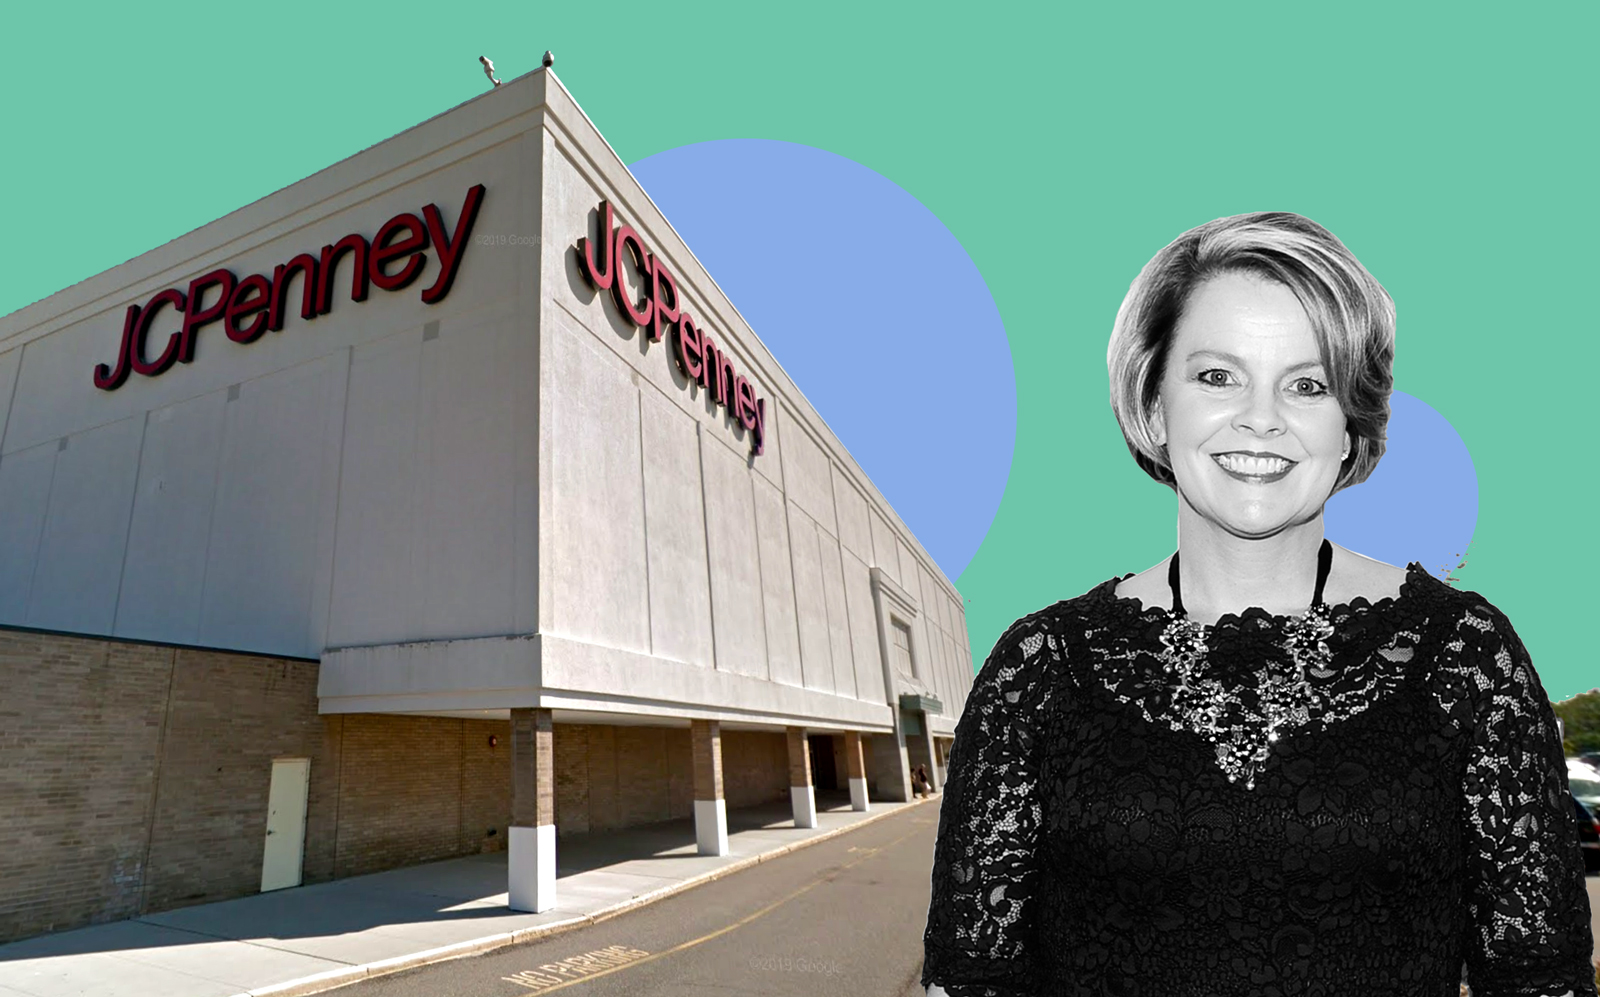 J.C. Penney at the Westfield South Shore mall in Long Island and  J.C. Penney CEO Jill Soltau (Google Maps; Getty)